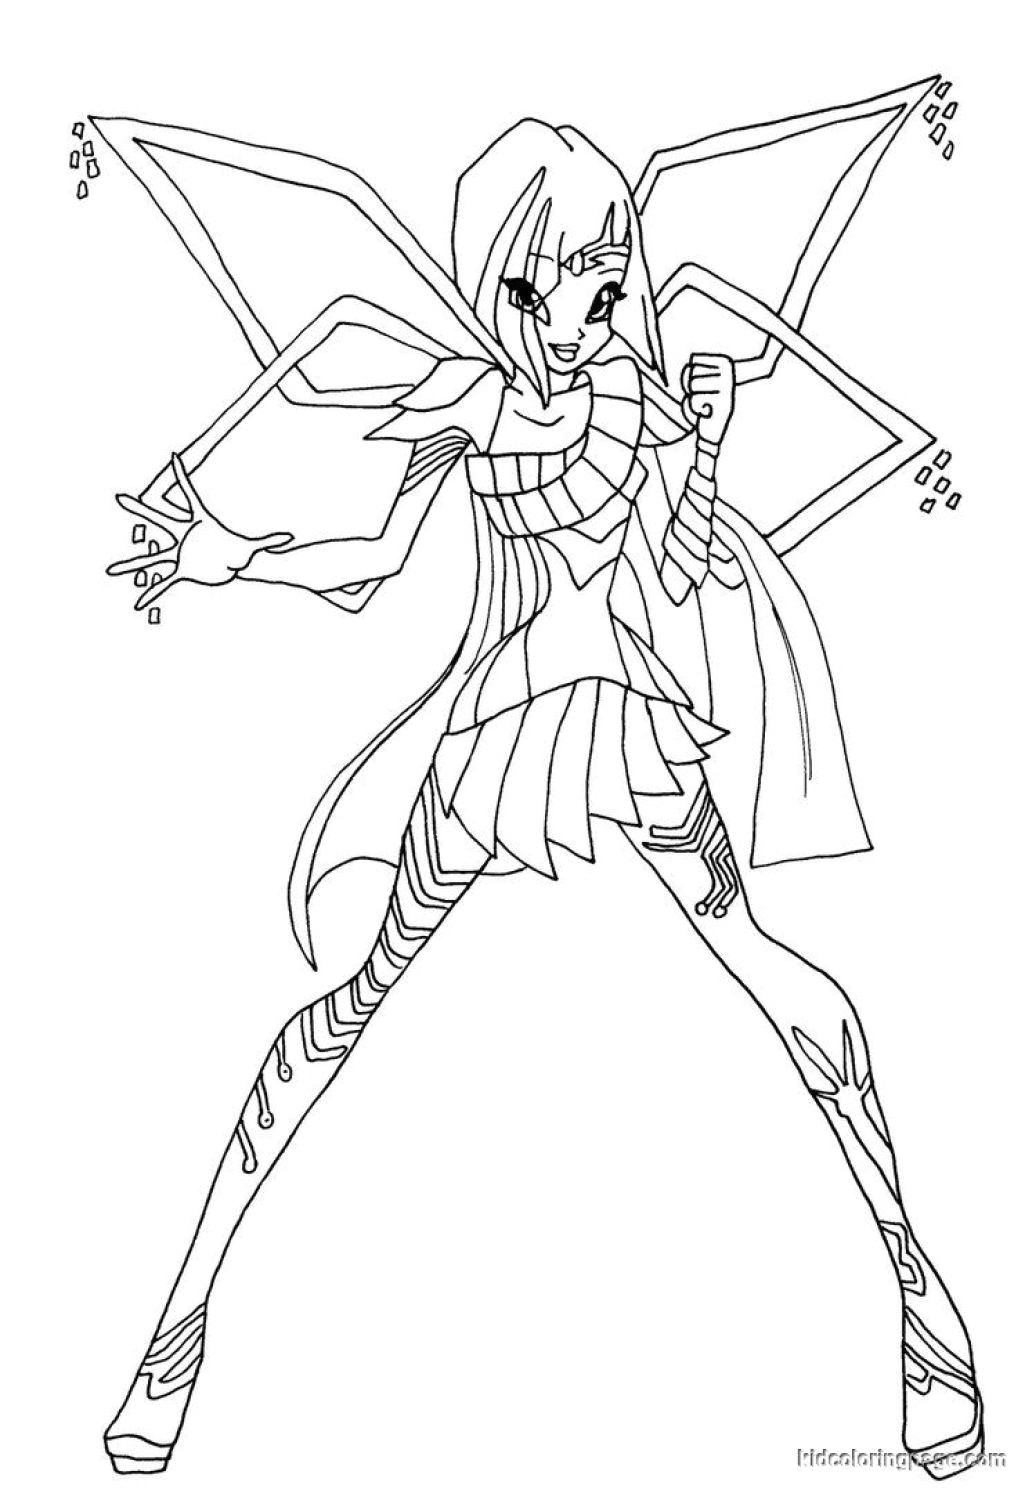 Winx club coloring pages Google Search